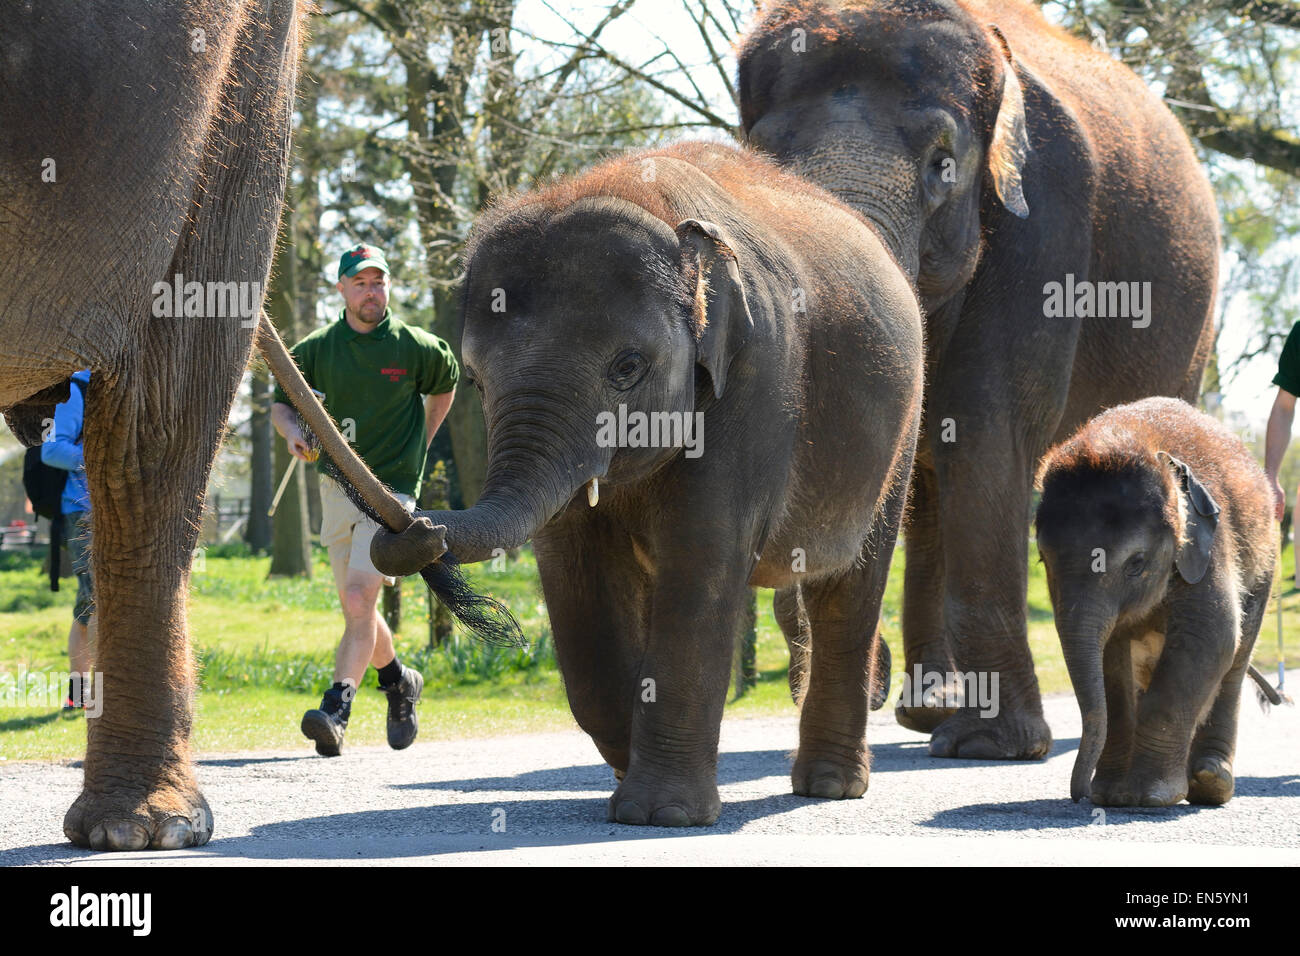 Young Asian Elephants going for a walk with their family & keeper at Whipsnade Zoo, Bedfordshire (EDITORIAL USE ONLY) Stock Photo